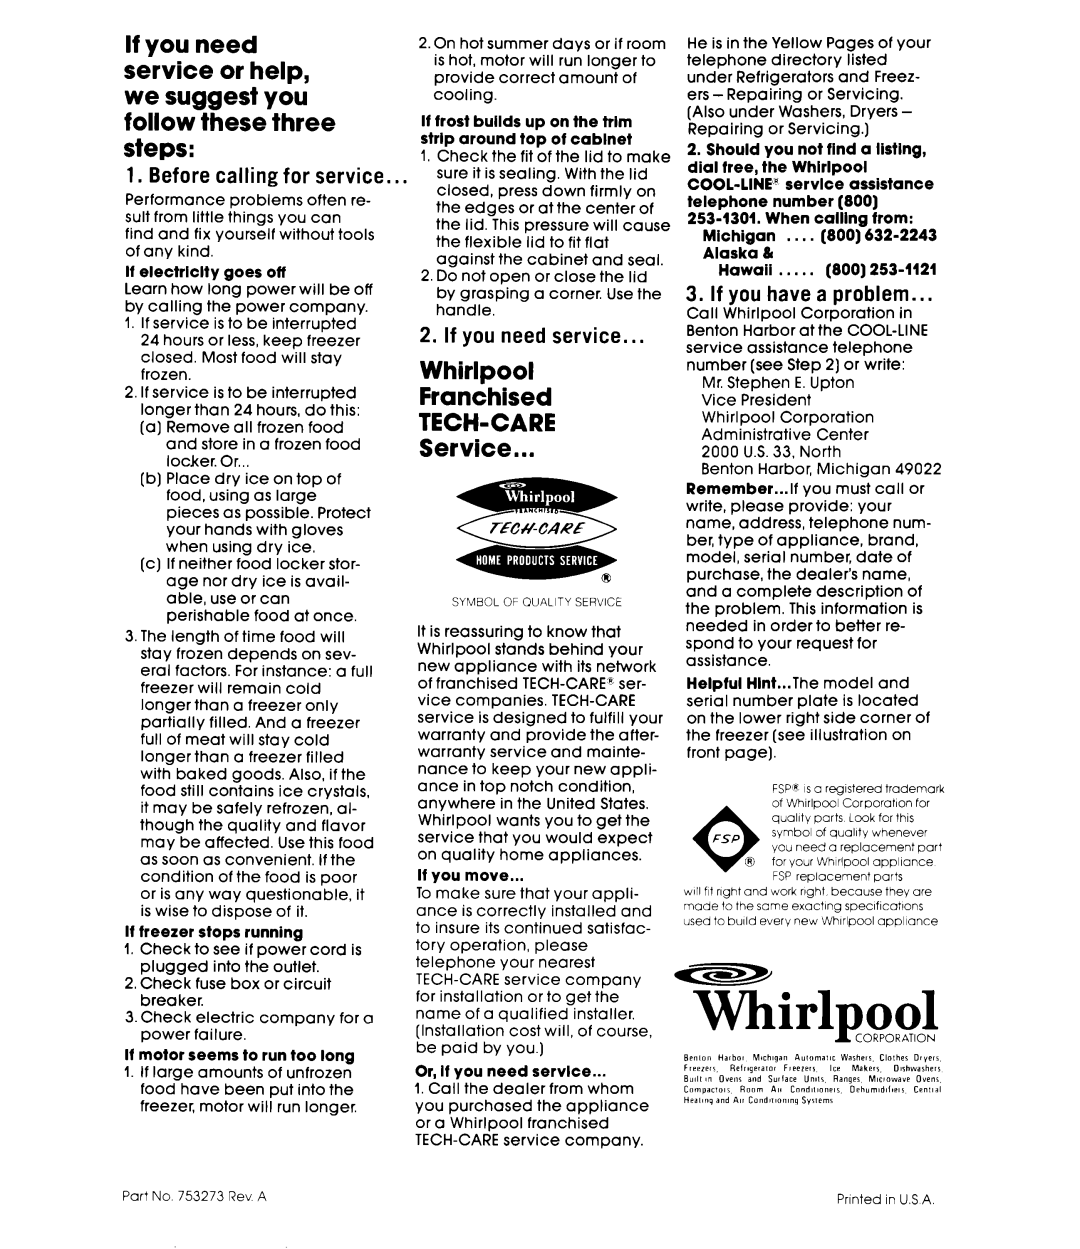 Whirlpool EHH-150CW manual Before calling for service, If you need service, If you have a problem, Whirlpool 